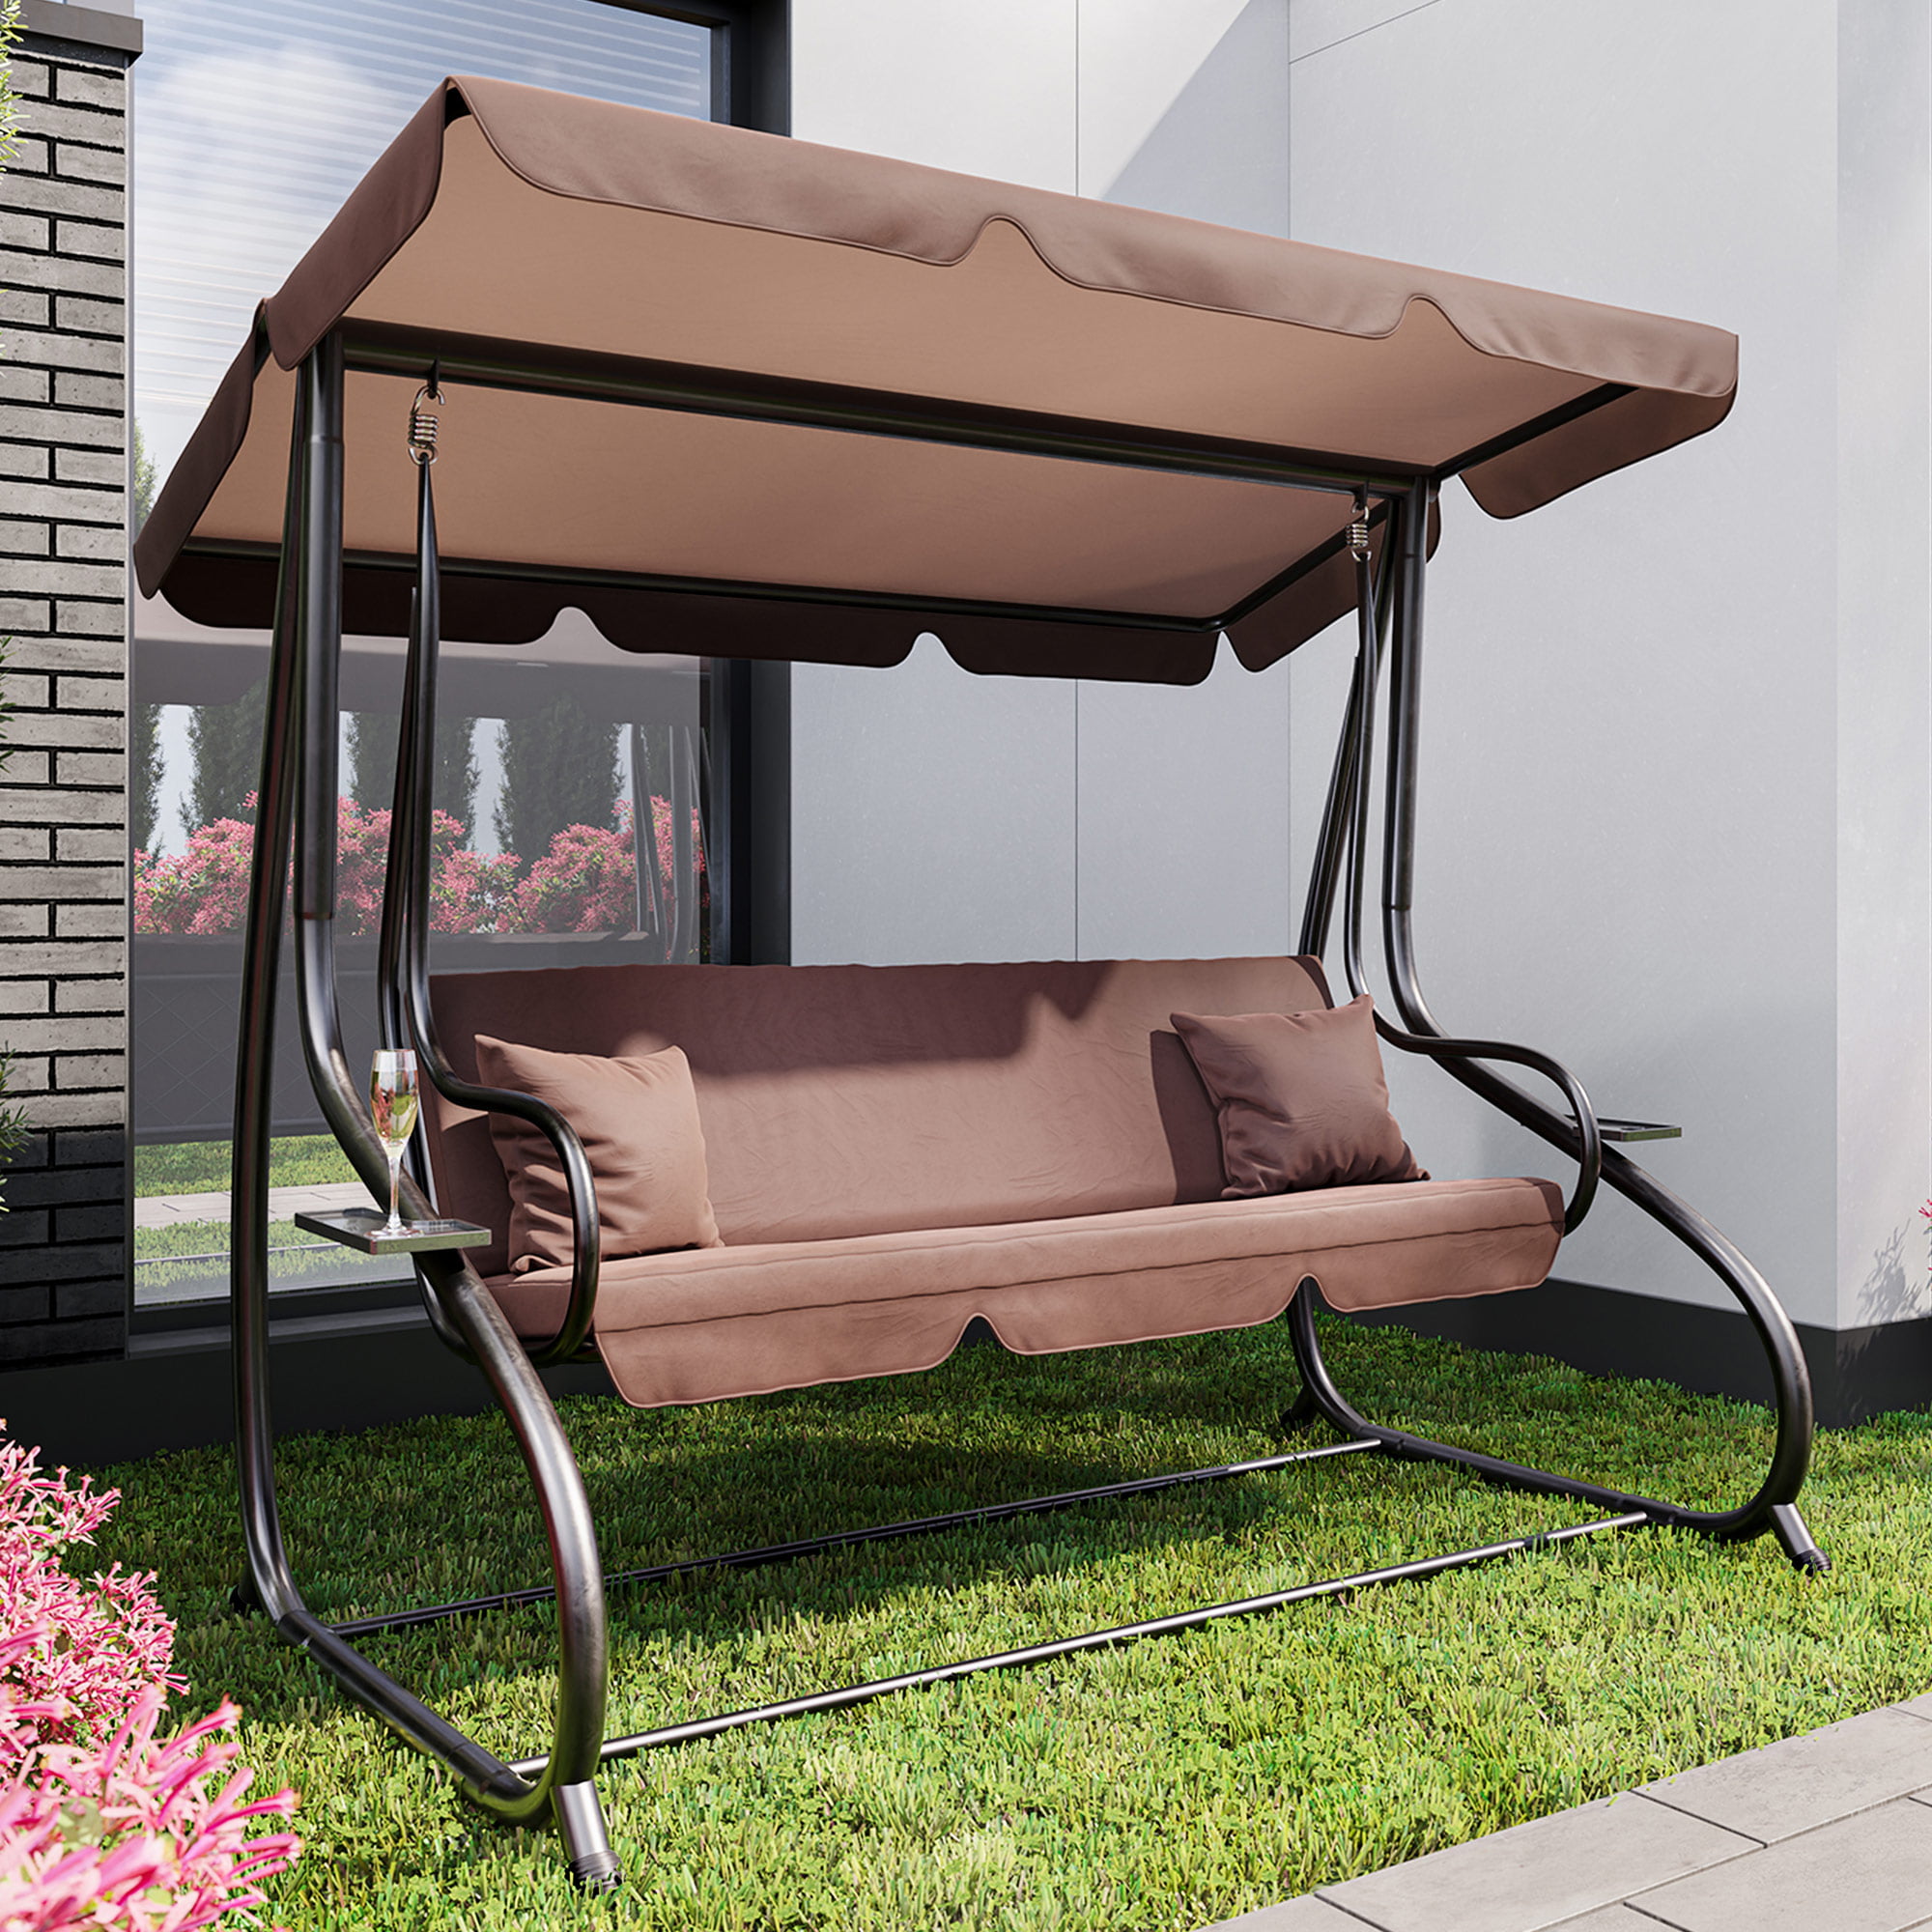 Outdoor Canopy Swing Patio Chair Lounge 2 Person Seats Hammock Porch Steel Bench 